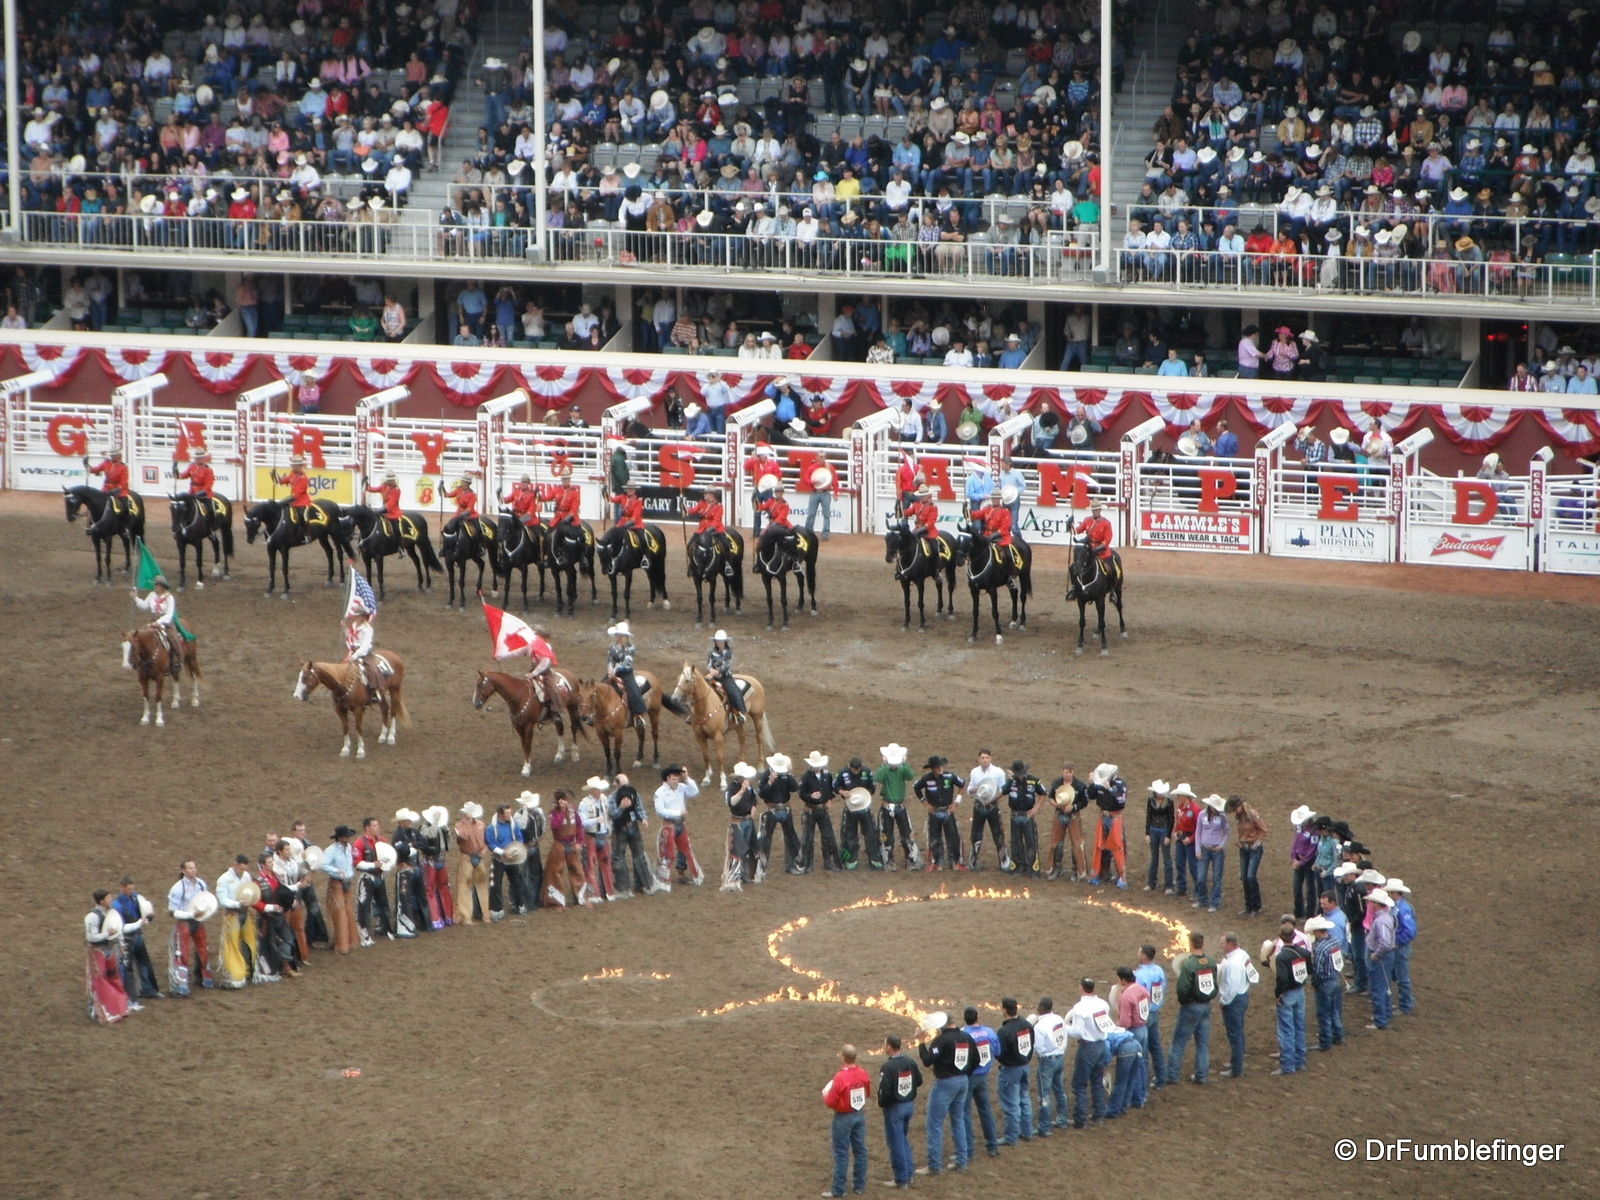 Calgary Stampede rodeo introduction